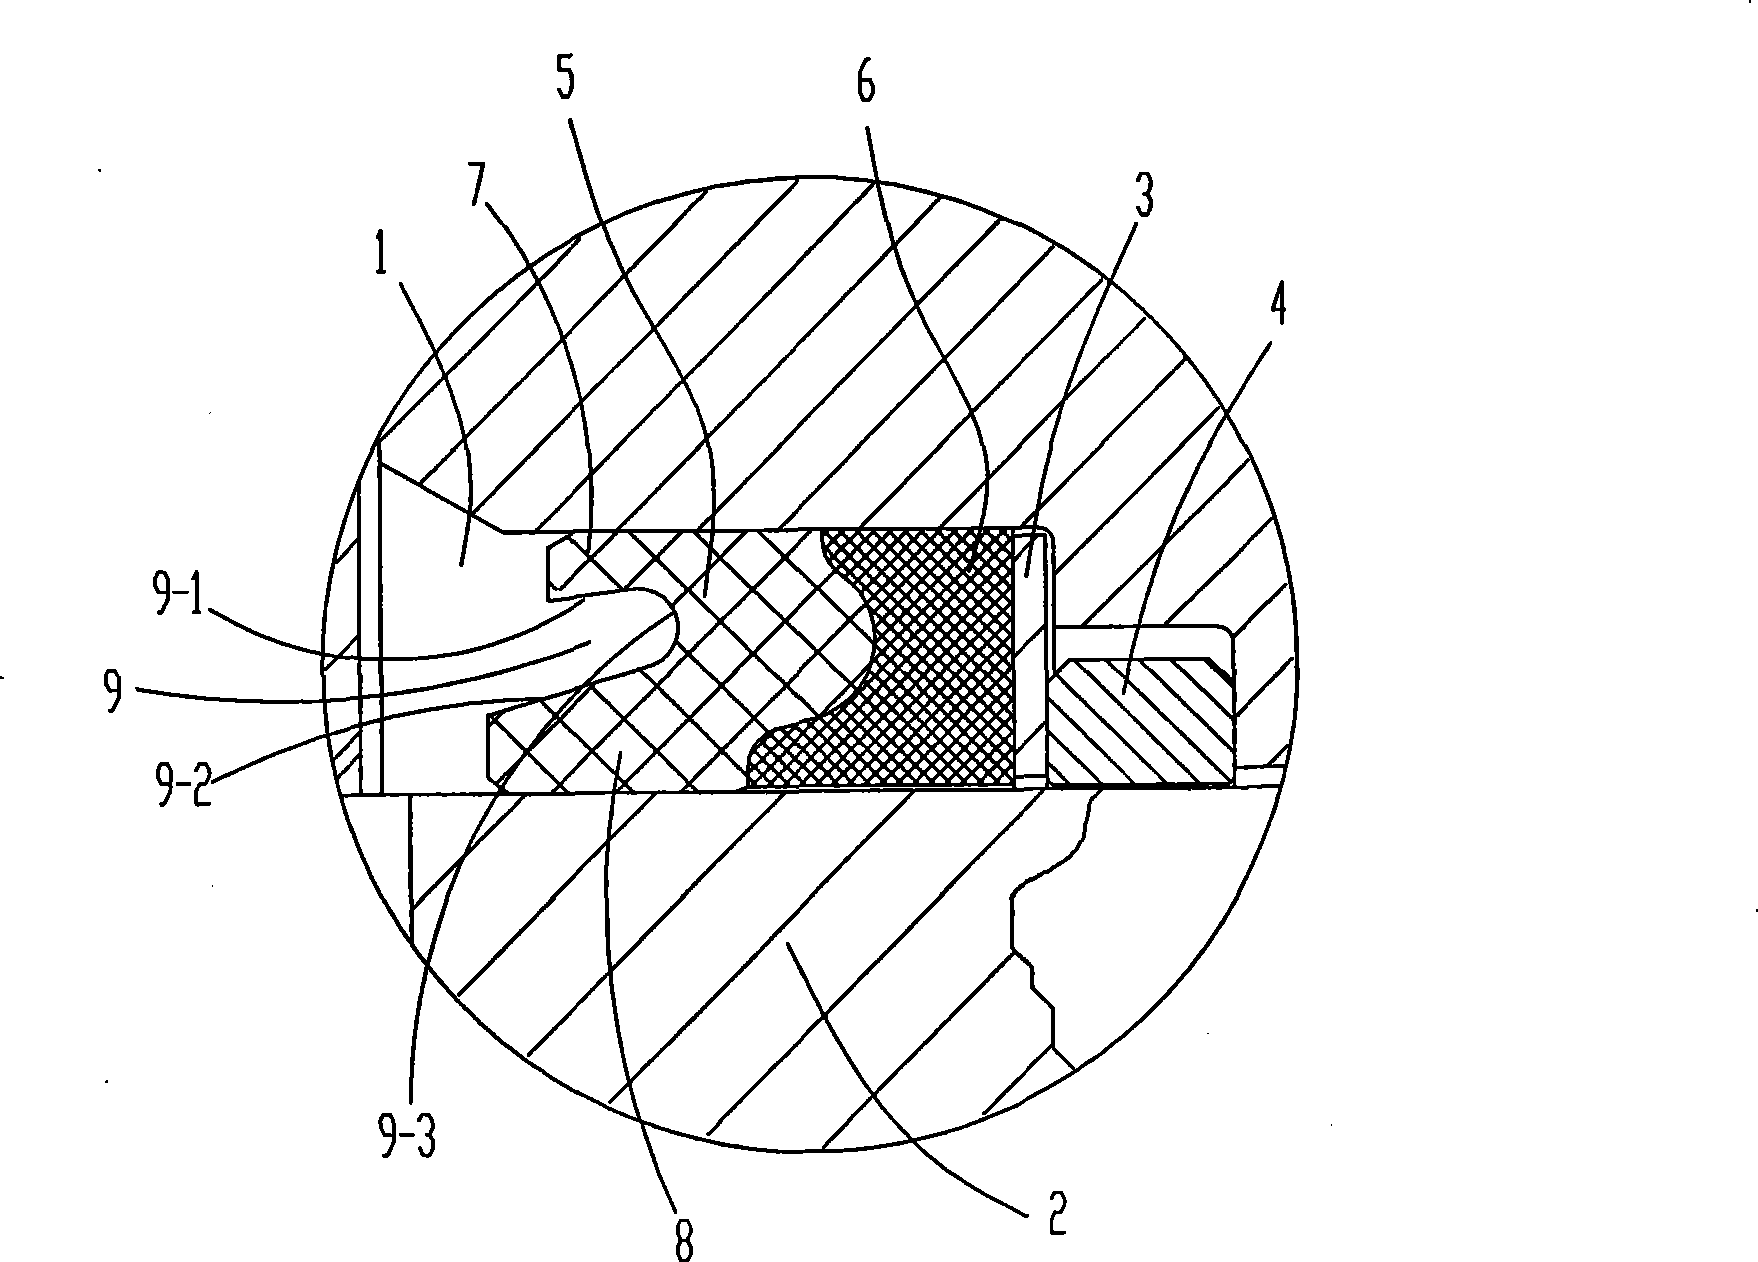 Compound type rotating axle seal